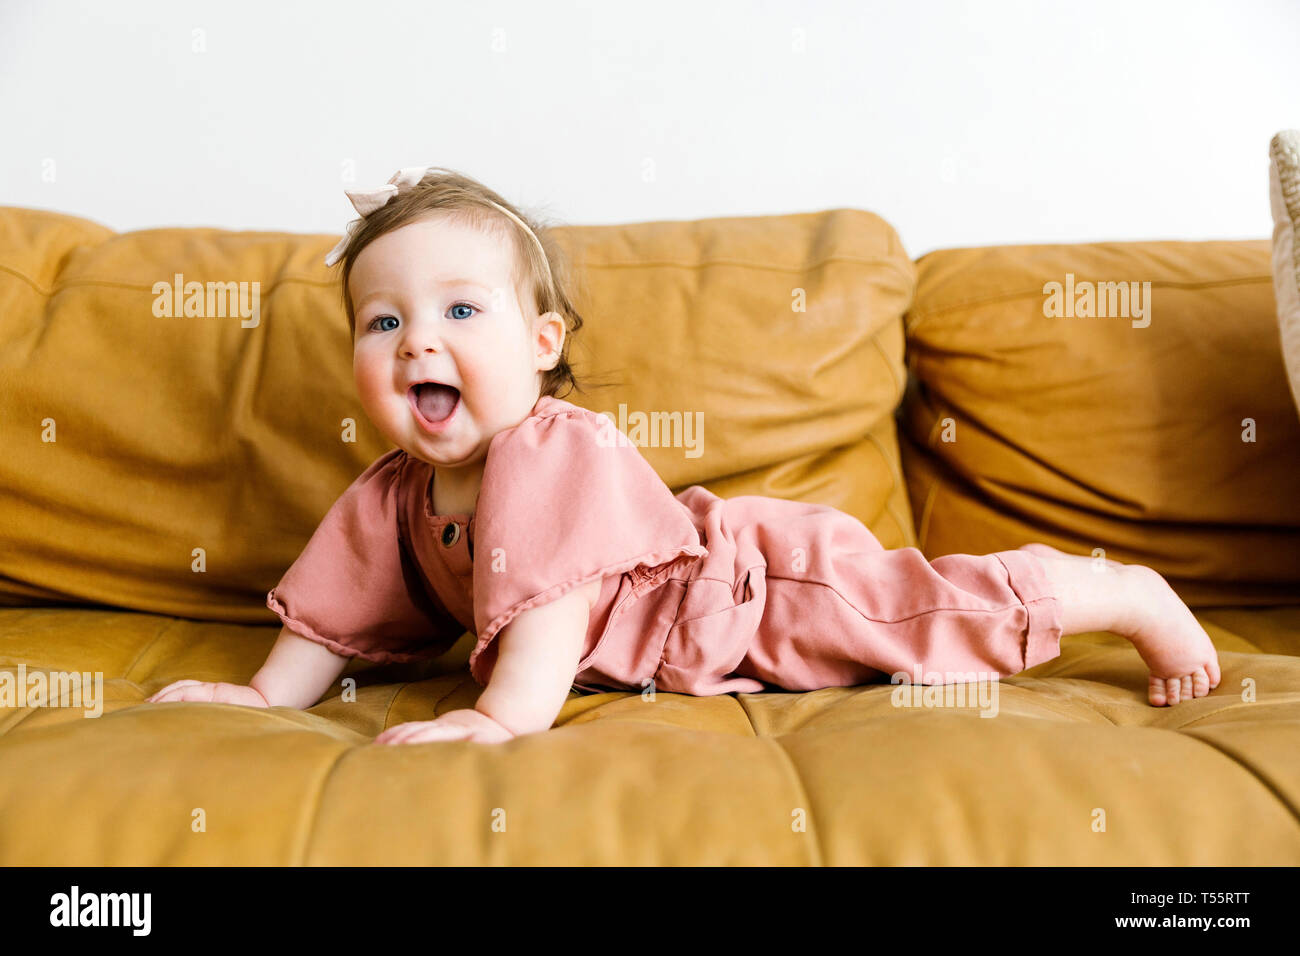 Baby girl wearing pink outfit on sofa Stock Photo